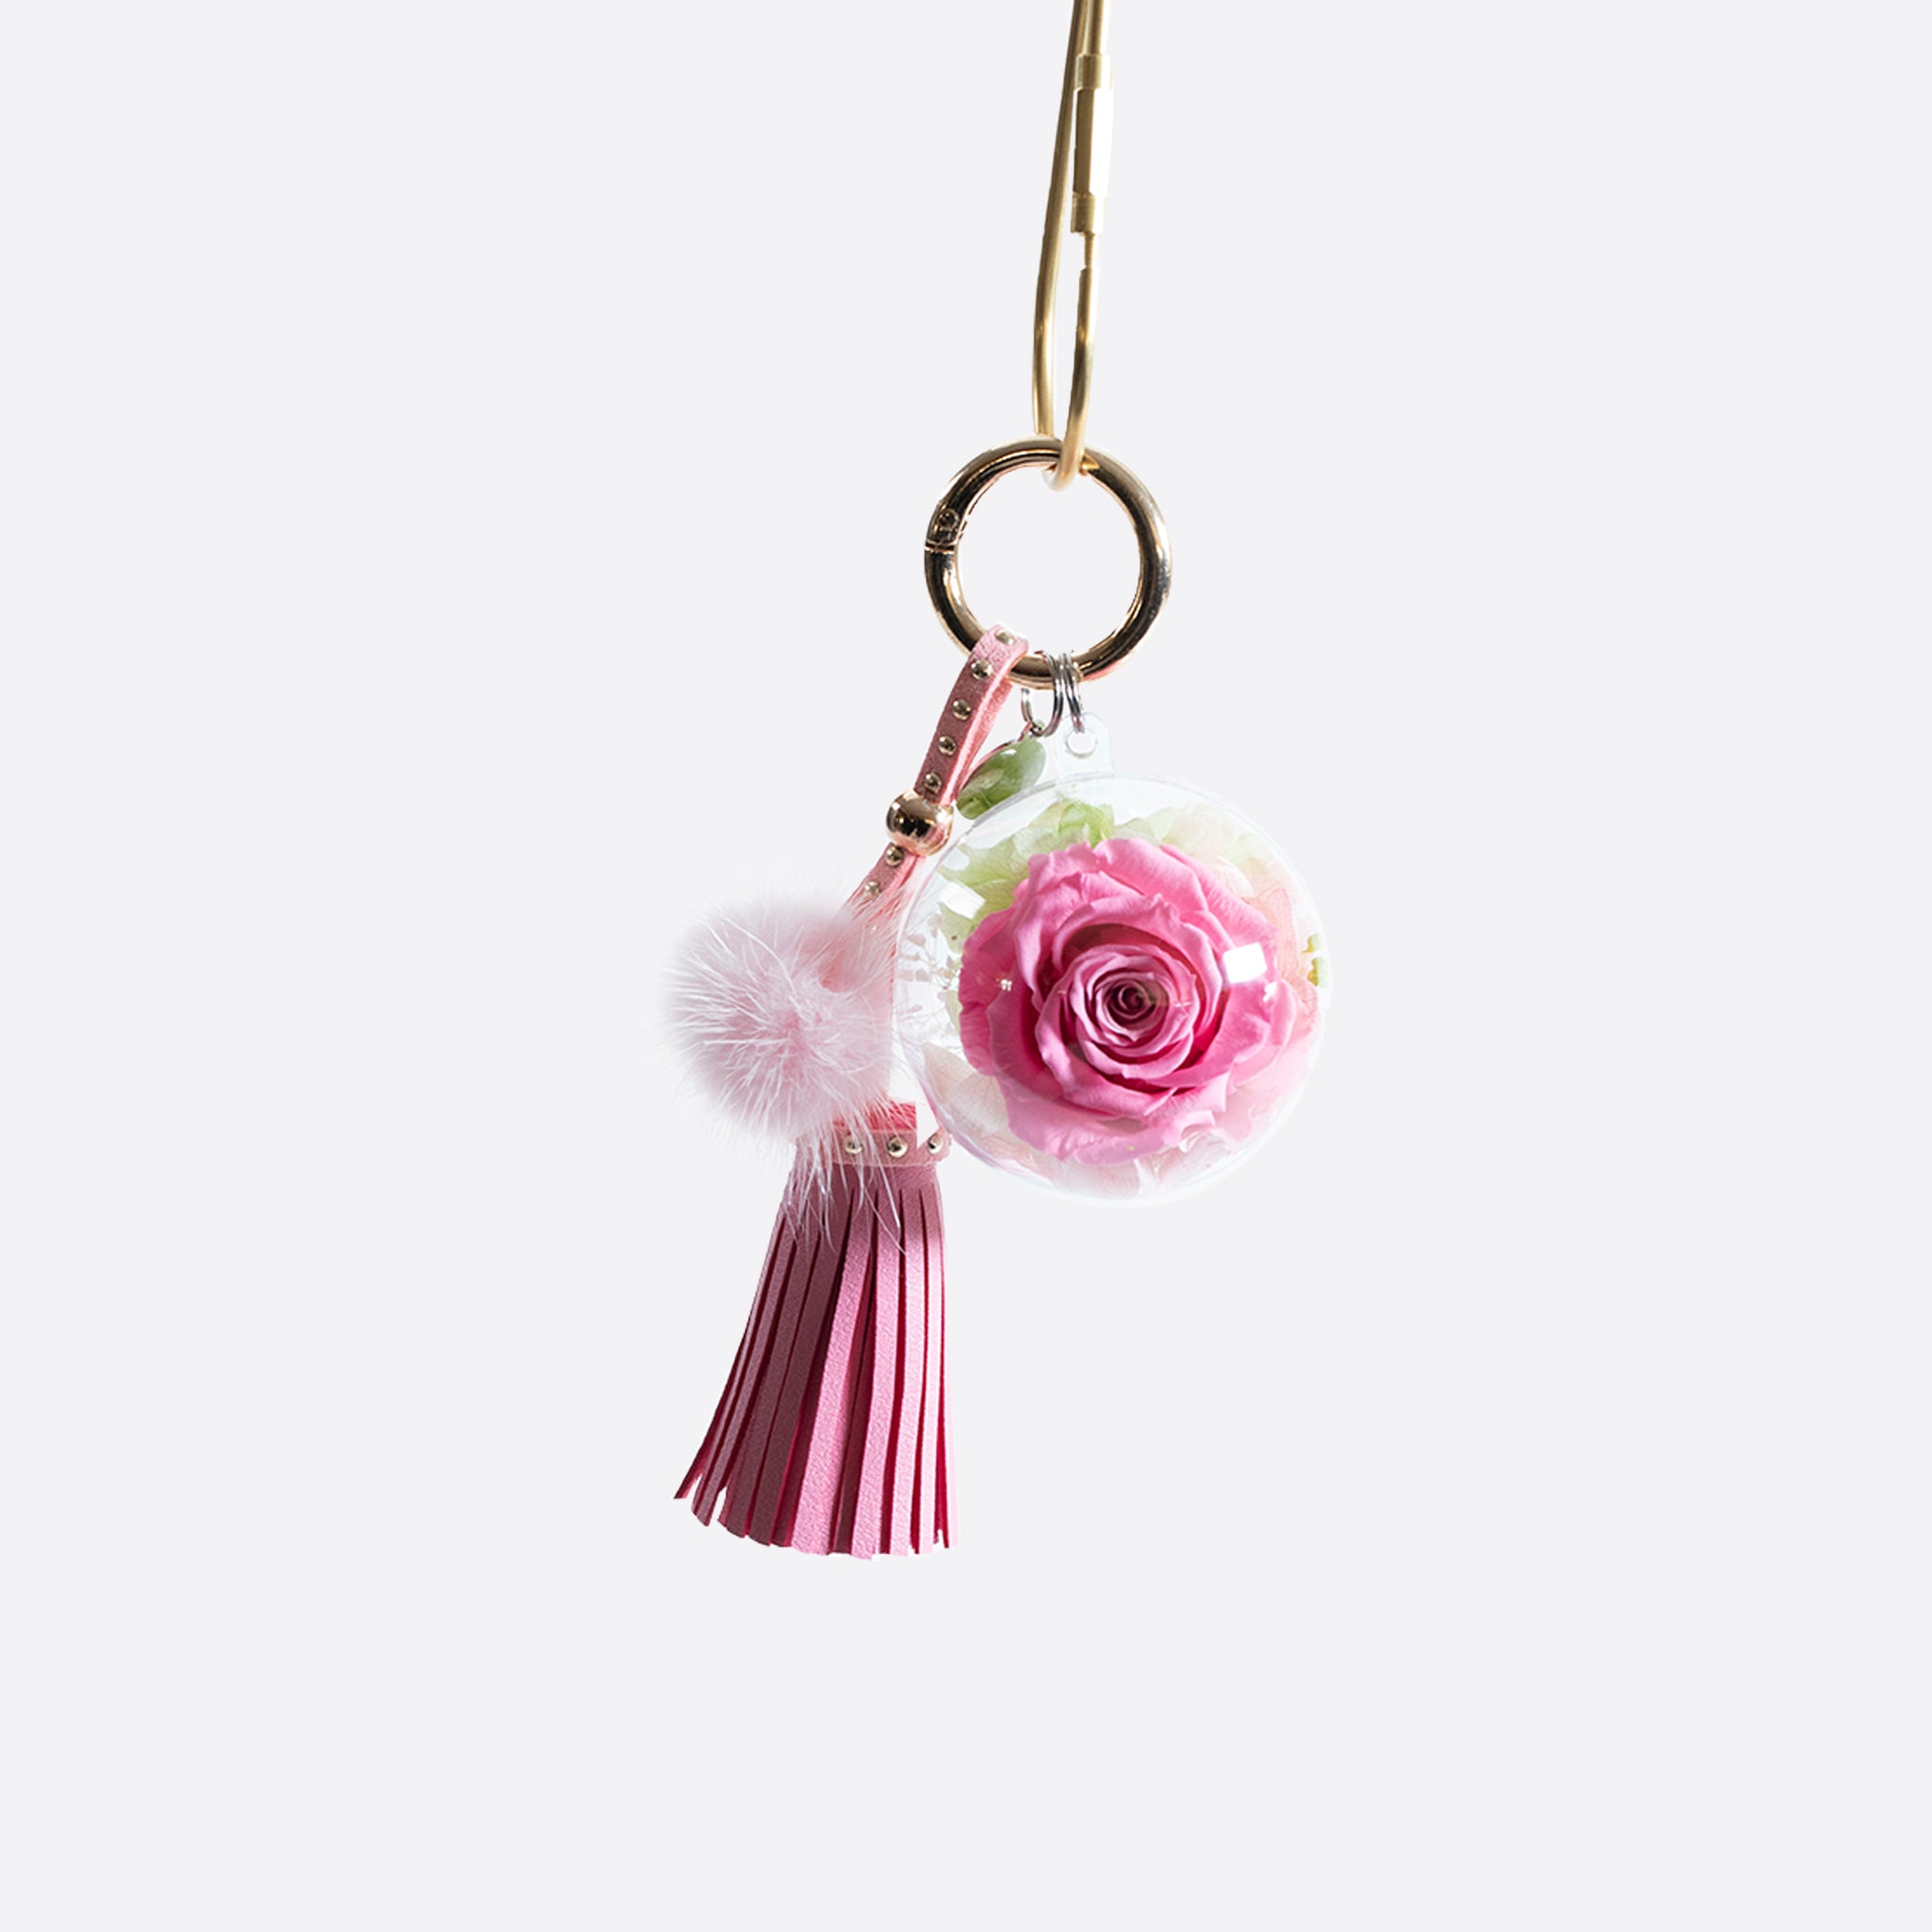 Everlasting Preserved Rose Pink Fluffy Ball Luxury Keychain | The Only Roses